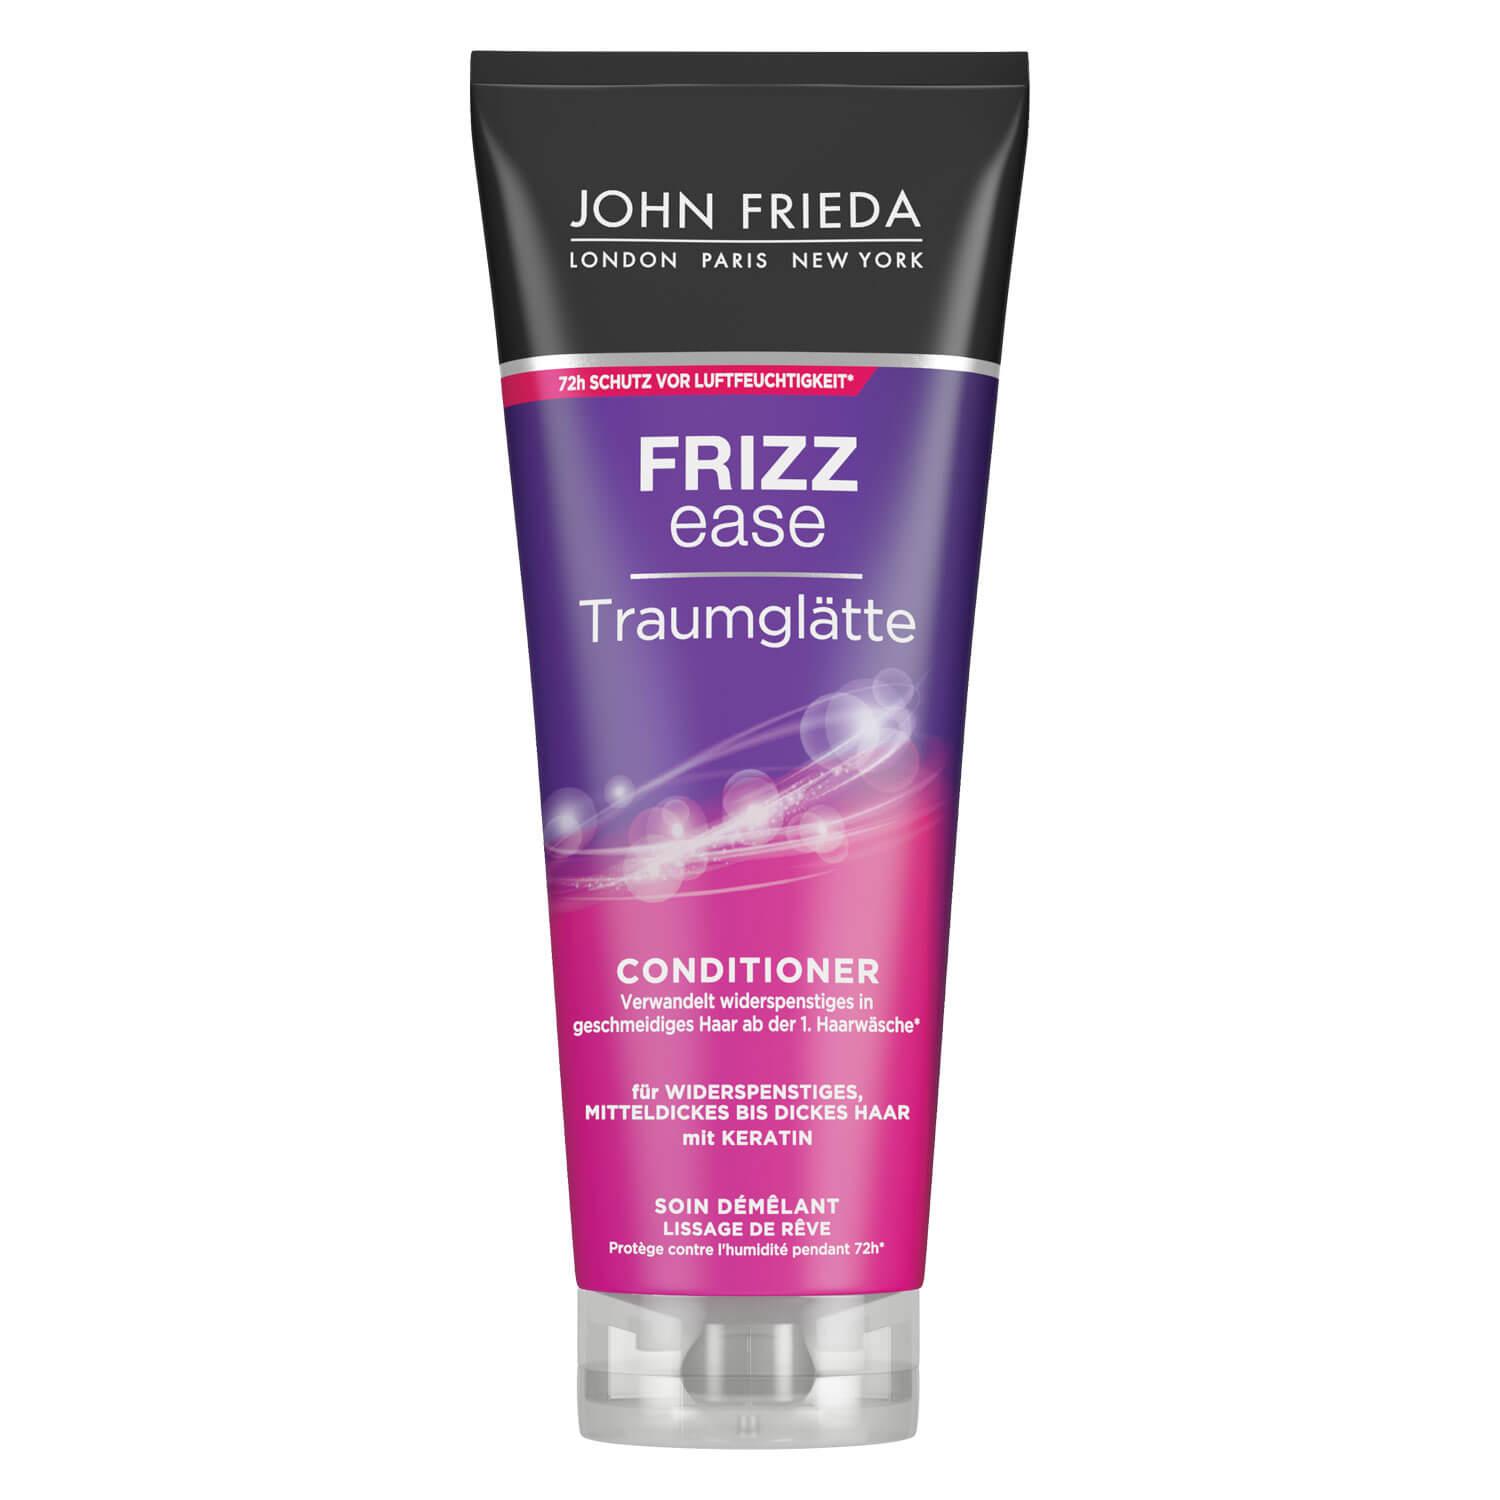 Frizz Ease - Traumglätte Conditioner